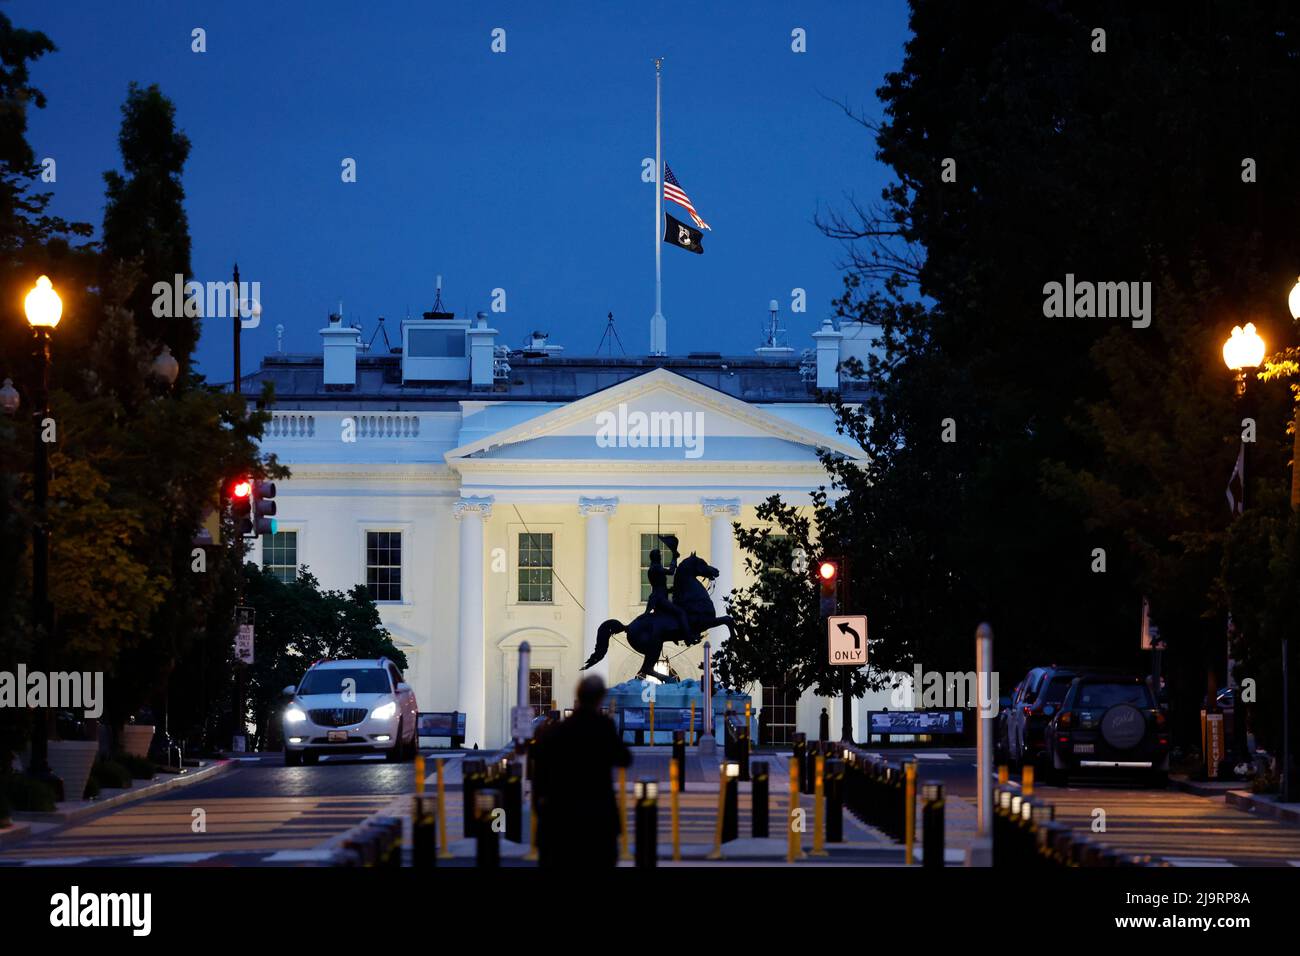 Washington, USA. 24th May, 2022. The U.S. flag flies at half-staff on top of the White House in Washington, DC, the United States, on May 24, 2022. At least 19 children and two adults were killed in a shooting at Robb Elementary School in the town of Uvalde, Texas, on Tuesday. Credit: Ting Shen/Xinhua/Alamy Live News Stock Photo